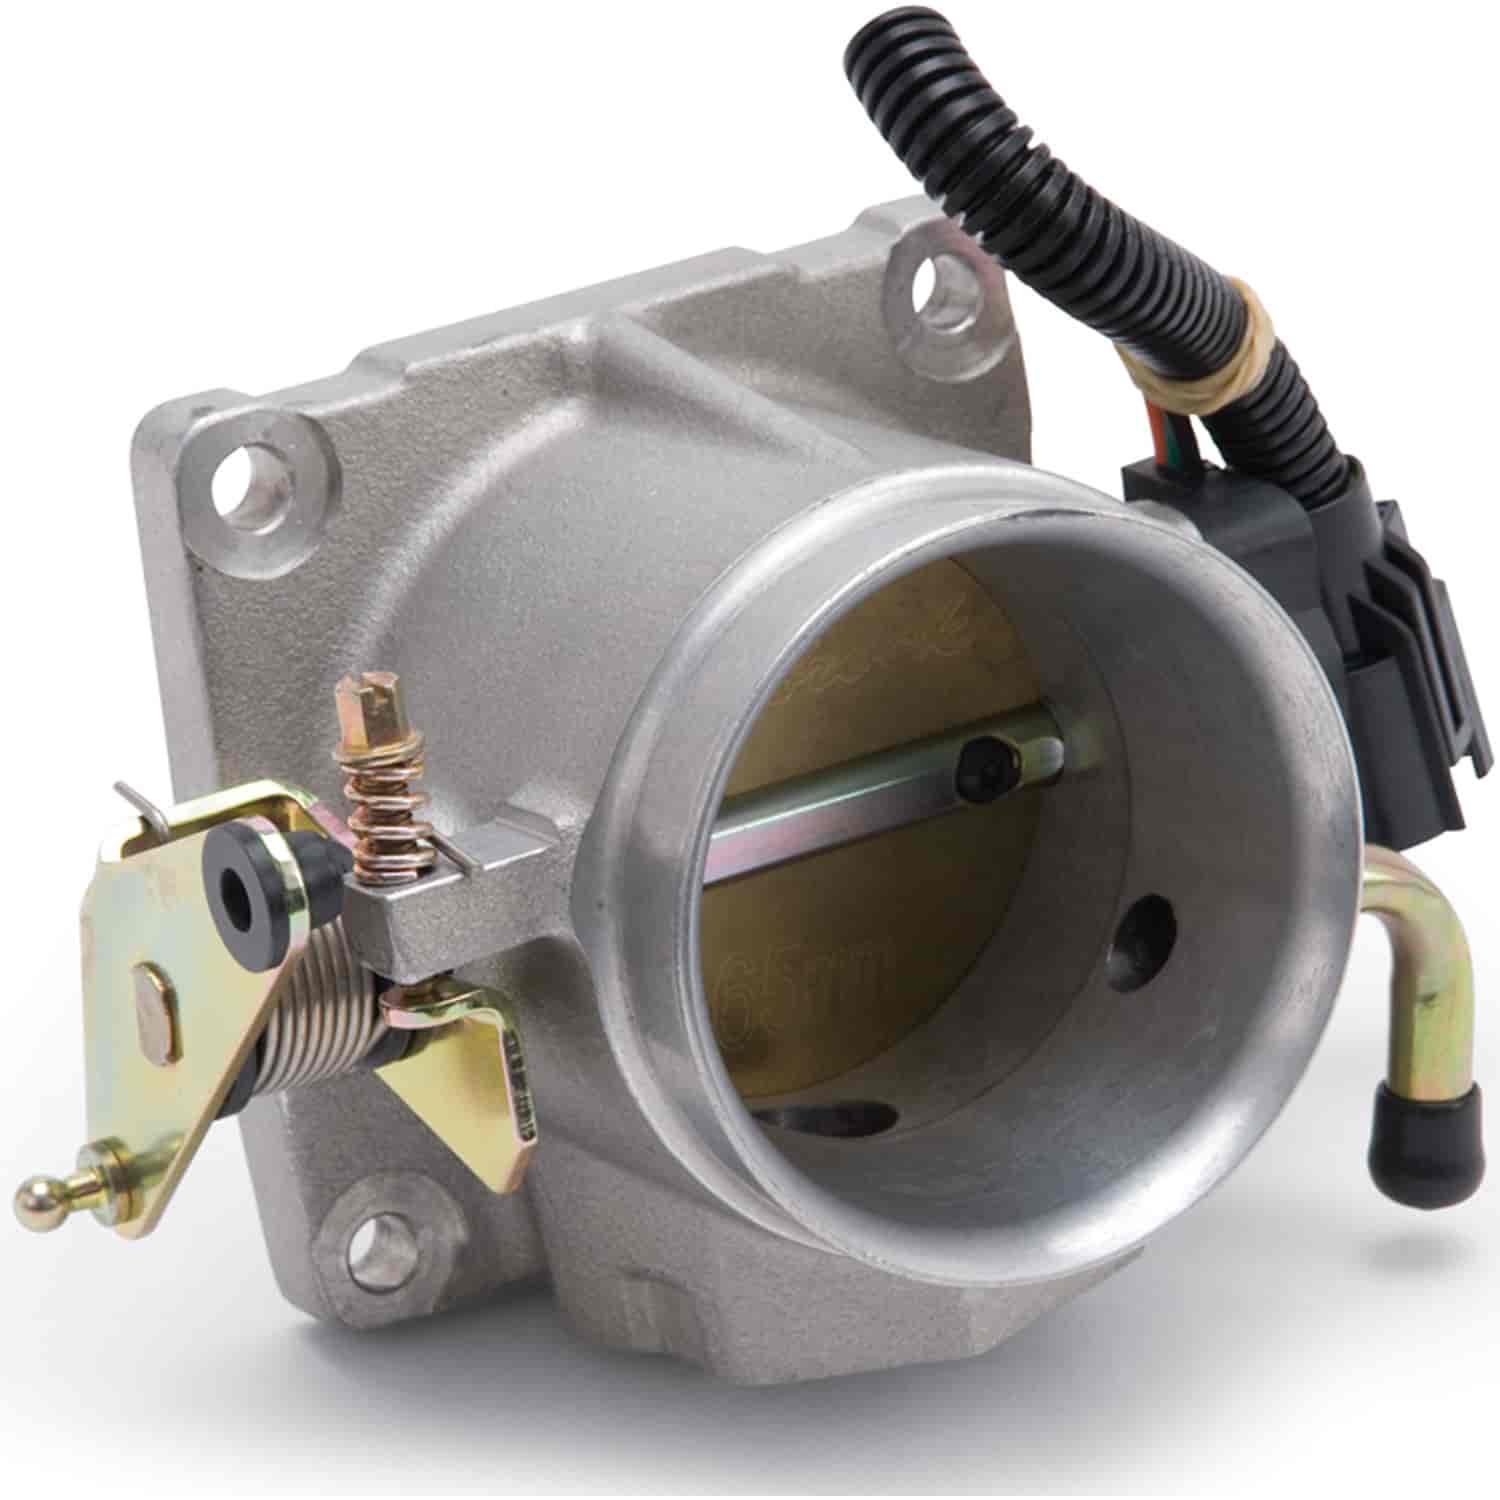 65mm Throttle Body for 1986-1993 Ford Mustang 5.0L